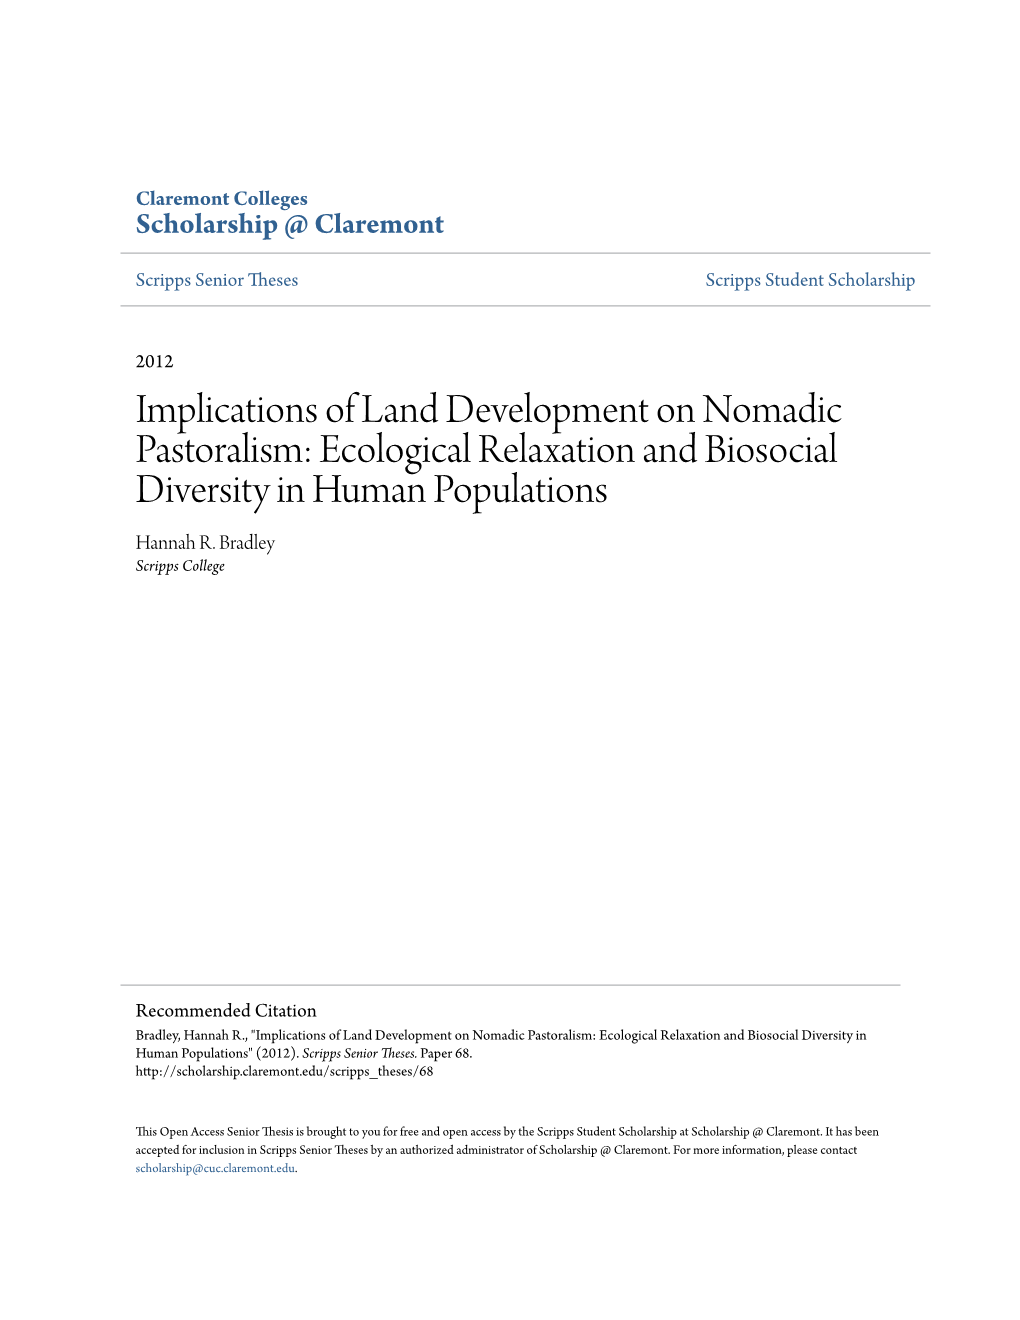 Implications of Land Development on Nomadic Pastoralism: Ecological Relaxation and Biosocial Diversity in Human Populations Hannah R